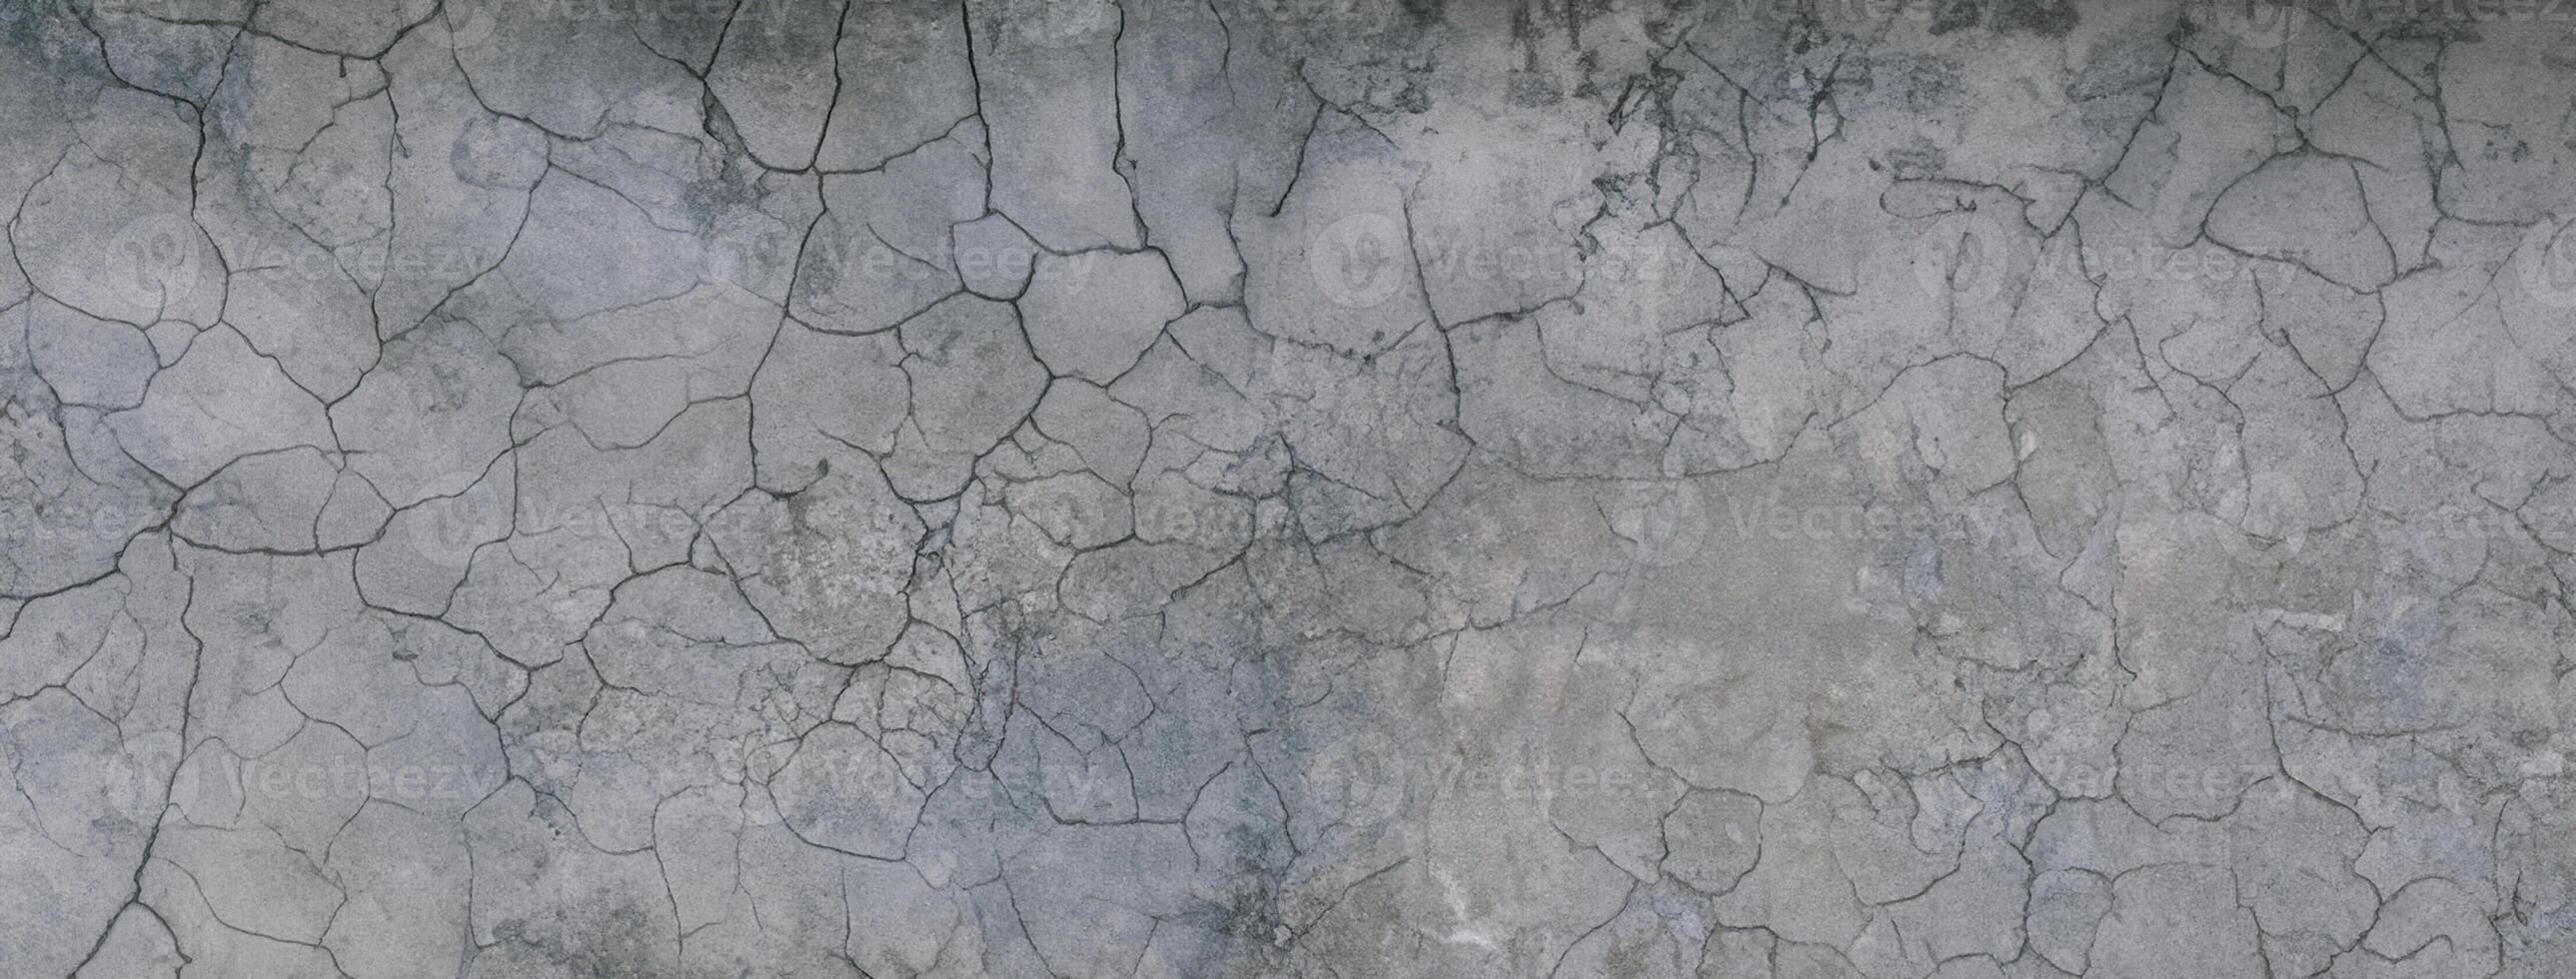 Wall concrete background. Old cement texture cracked, White, Grey vintage wallpaper abstract grunge background photo